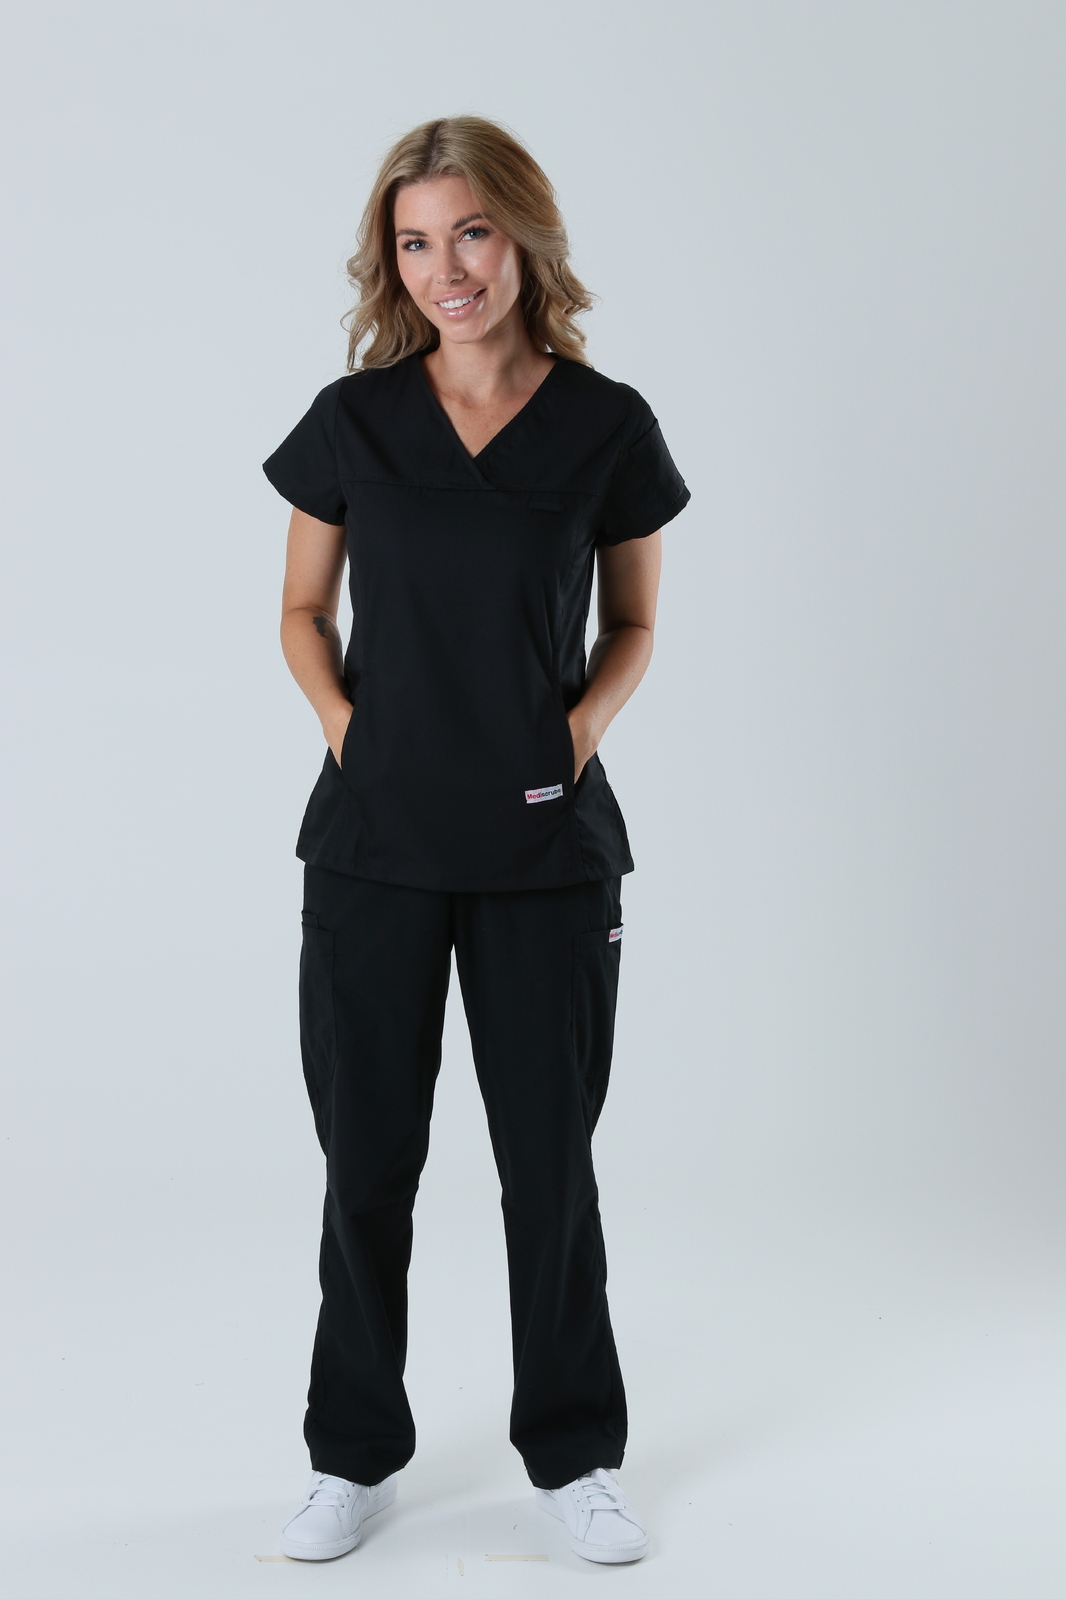 PAH - Nuclear Medicine (Women's Fit Solid Scrub Top and Cargo Pants in Black incl Logos)